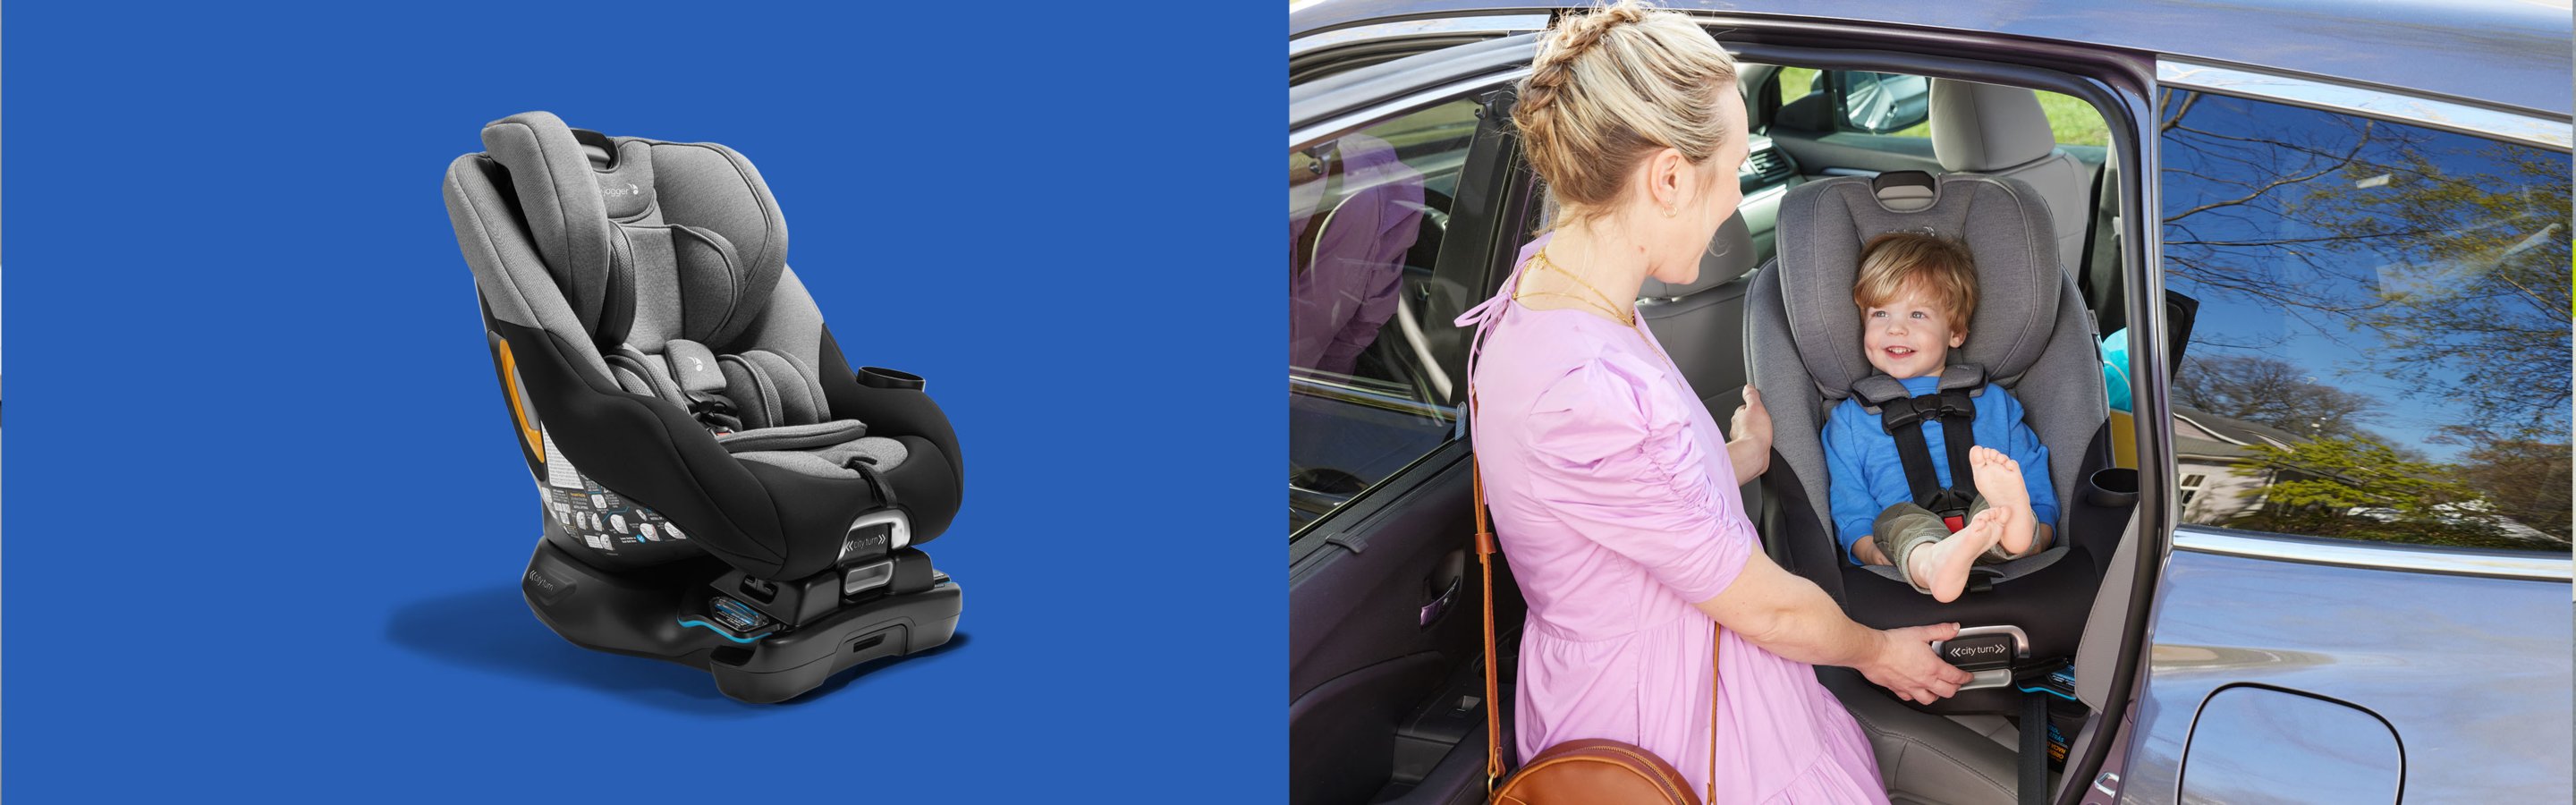 Car seat accessories and On the Road items designed by Little